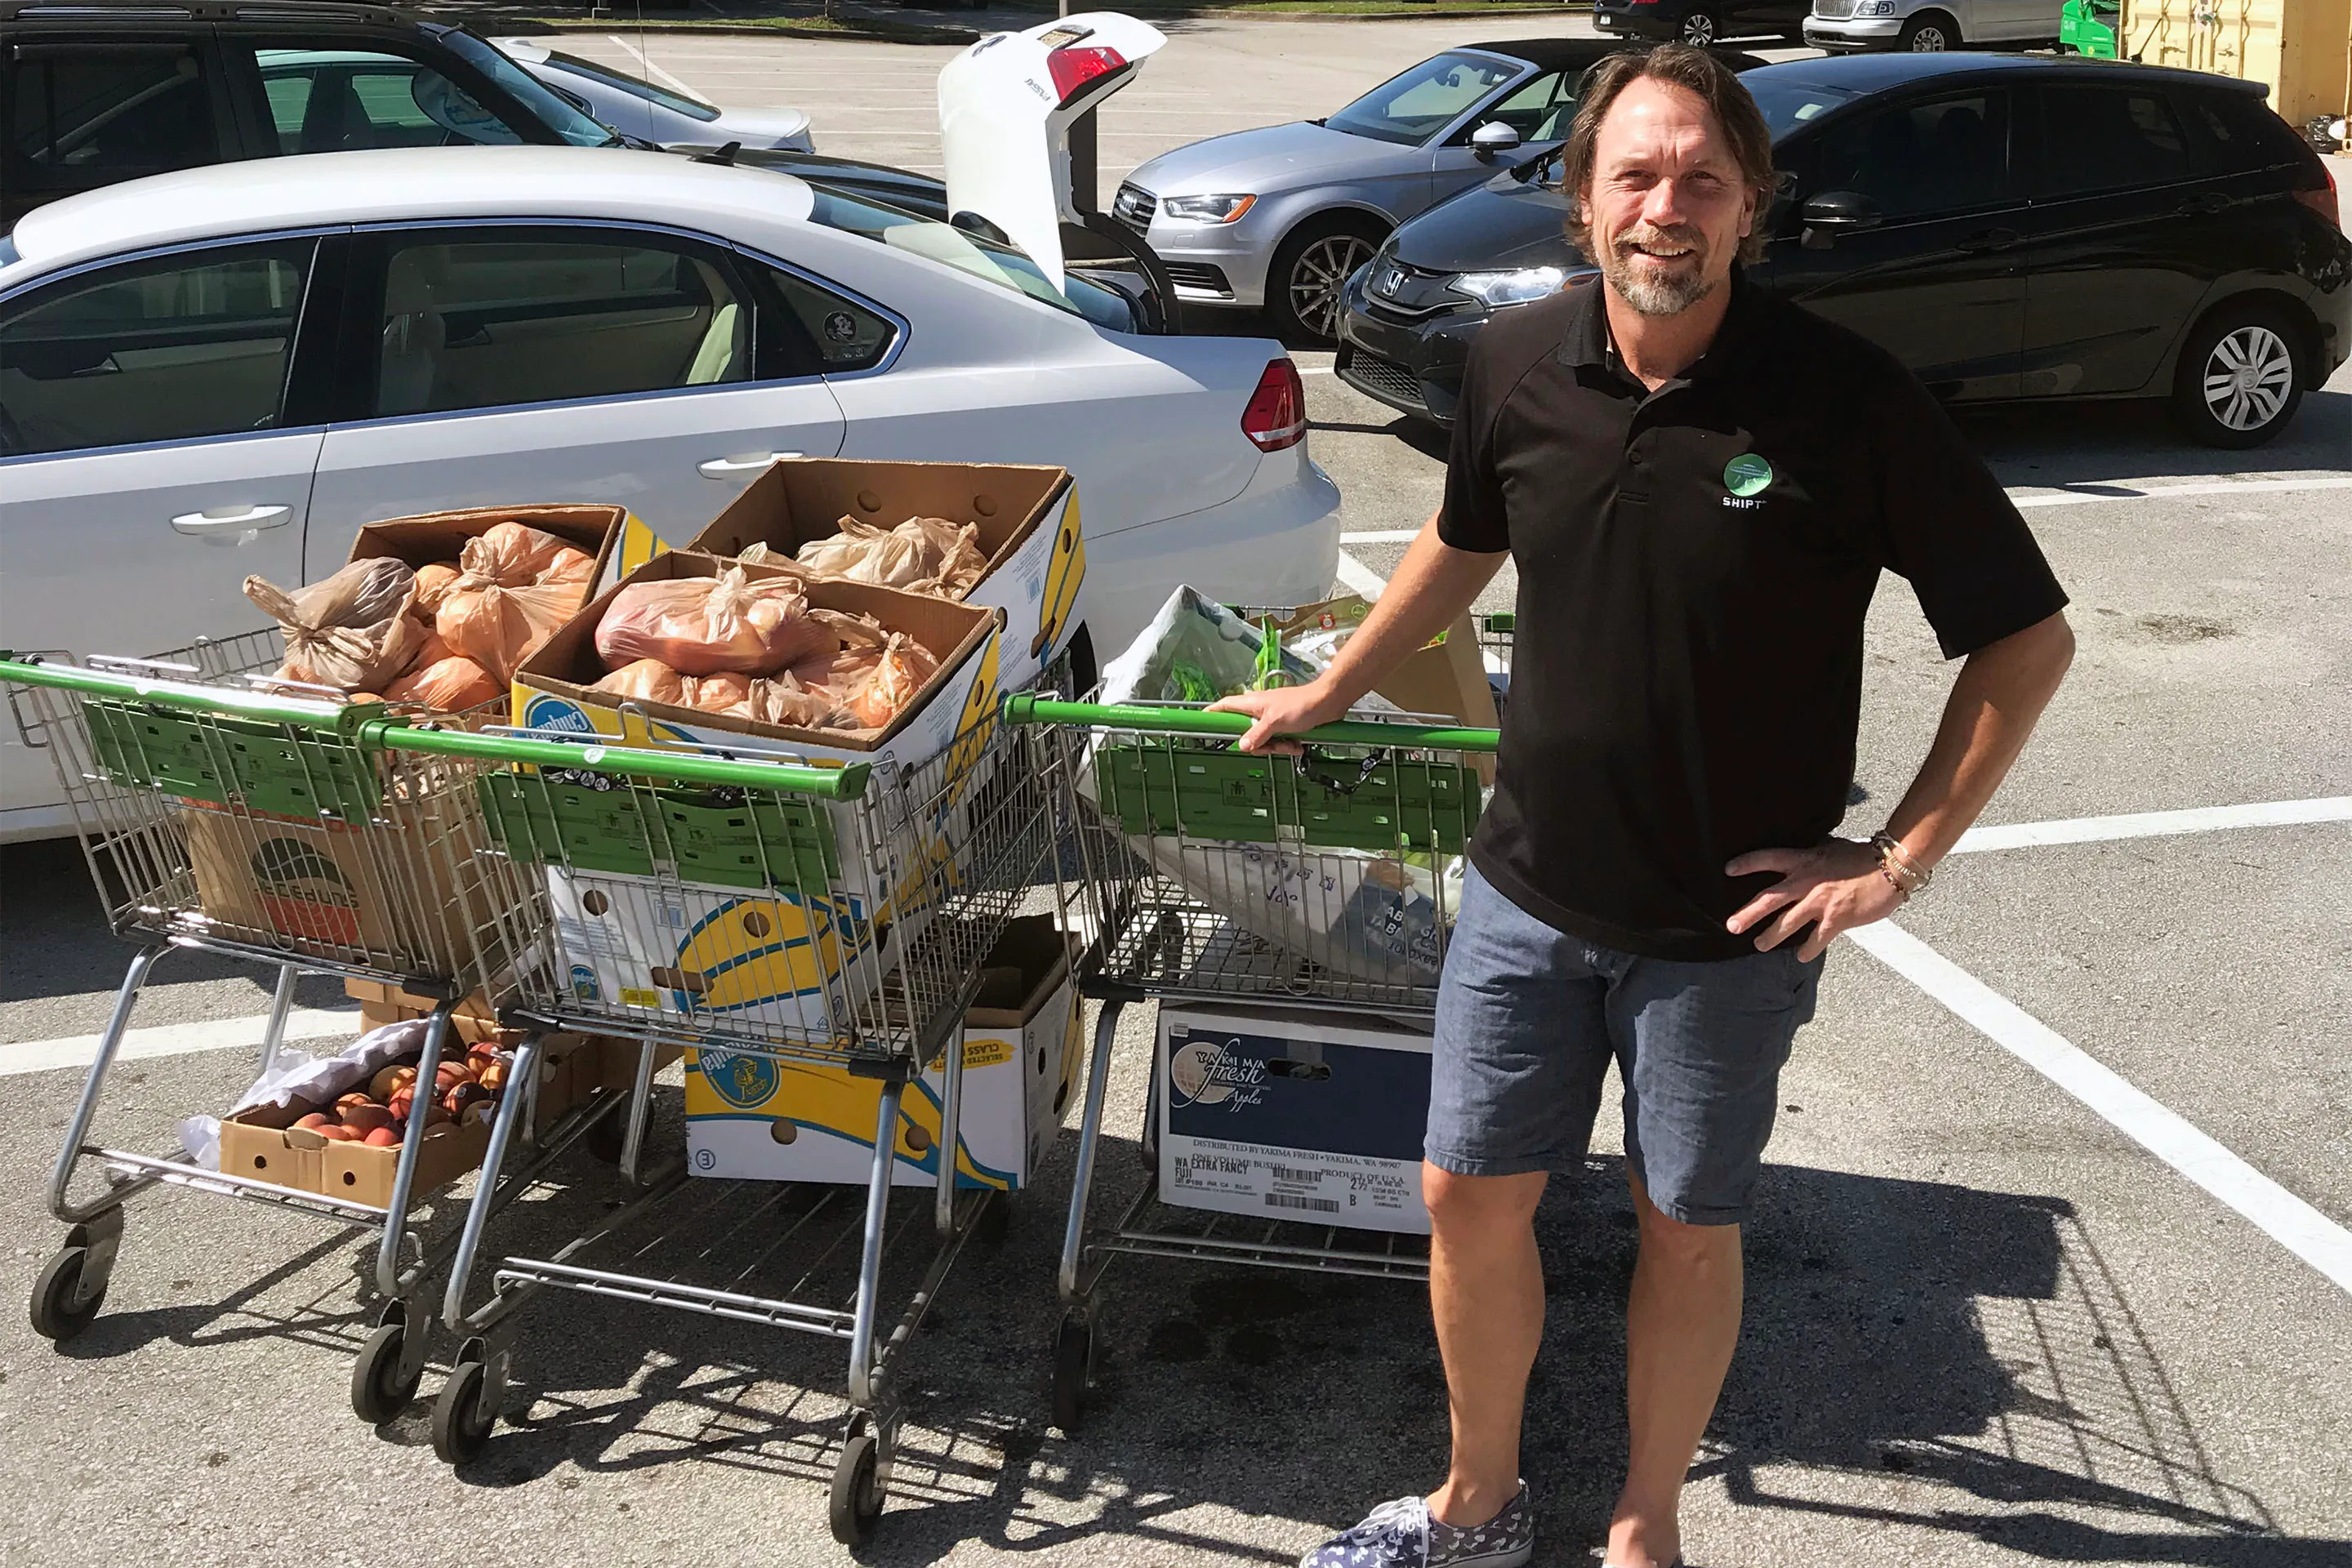 This High School Teacher Quit His Job to Deliver Groceries. Now He's Making $100,000 a Year